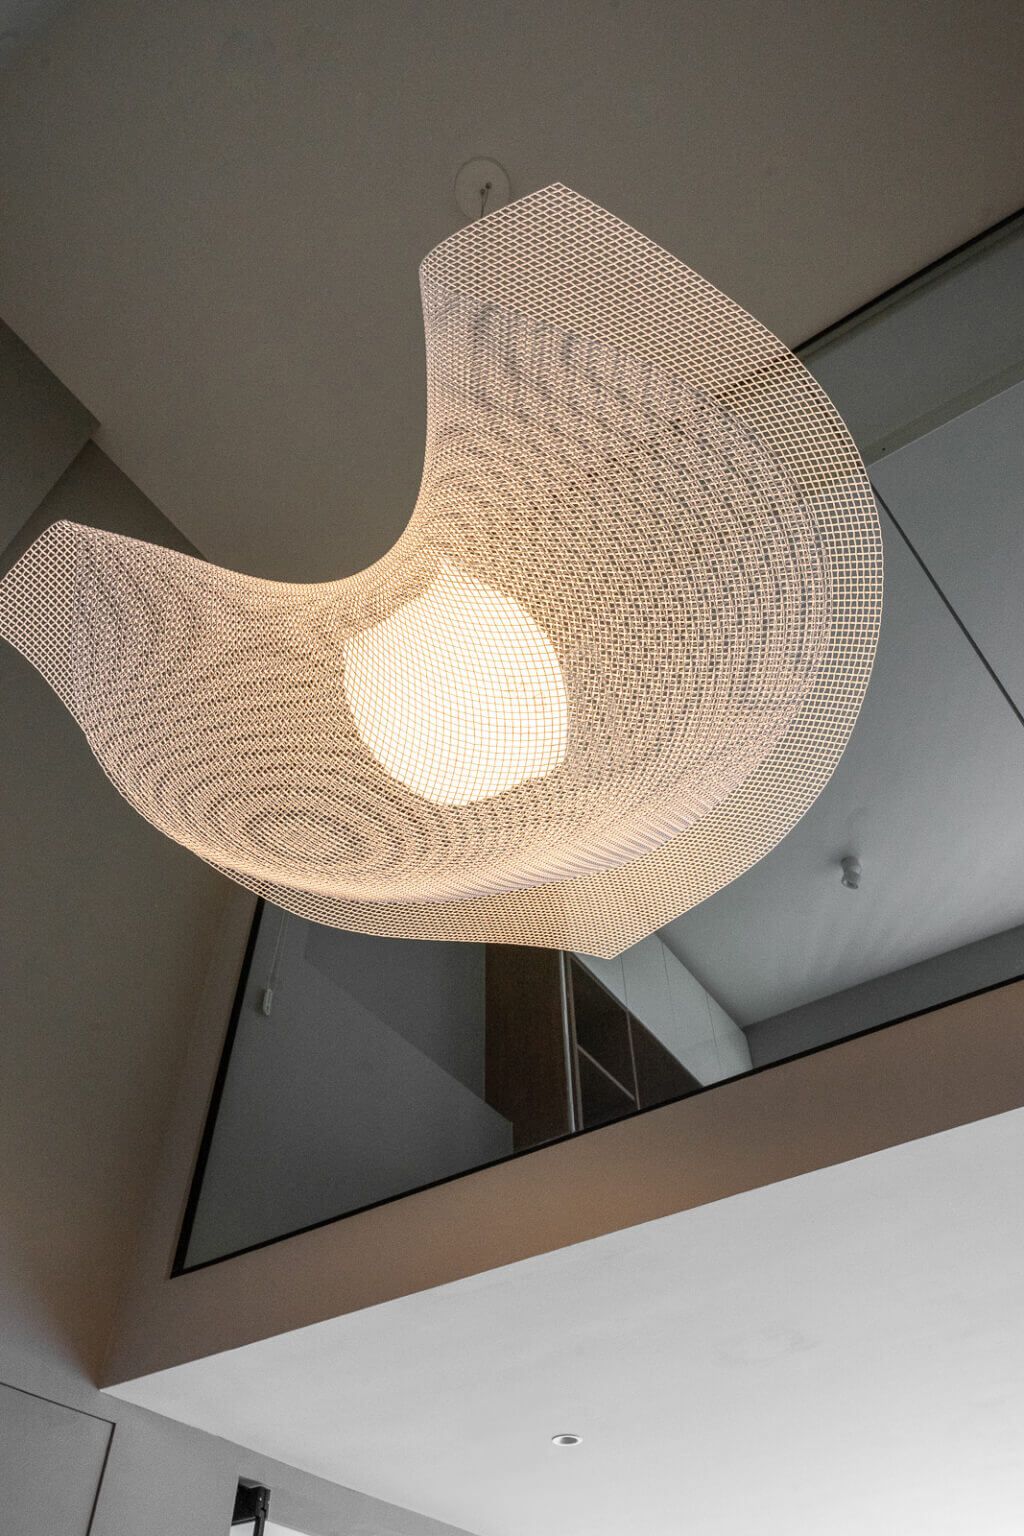 Contemporary loft lighting with a sculptural mesh pendant lamp, enhancing the modern aesthetic of high-ceiling interiors